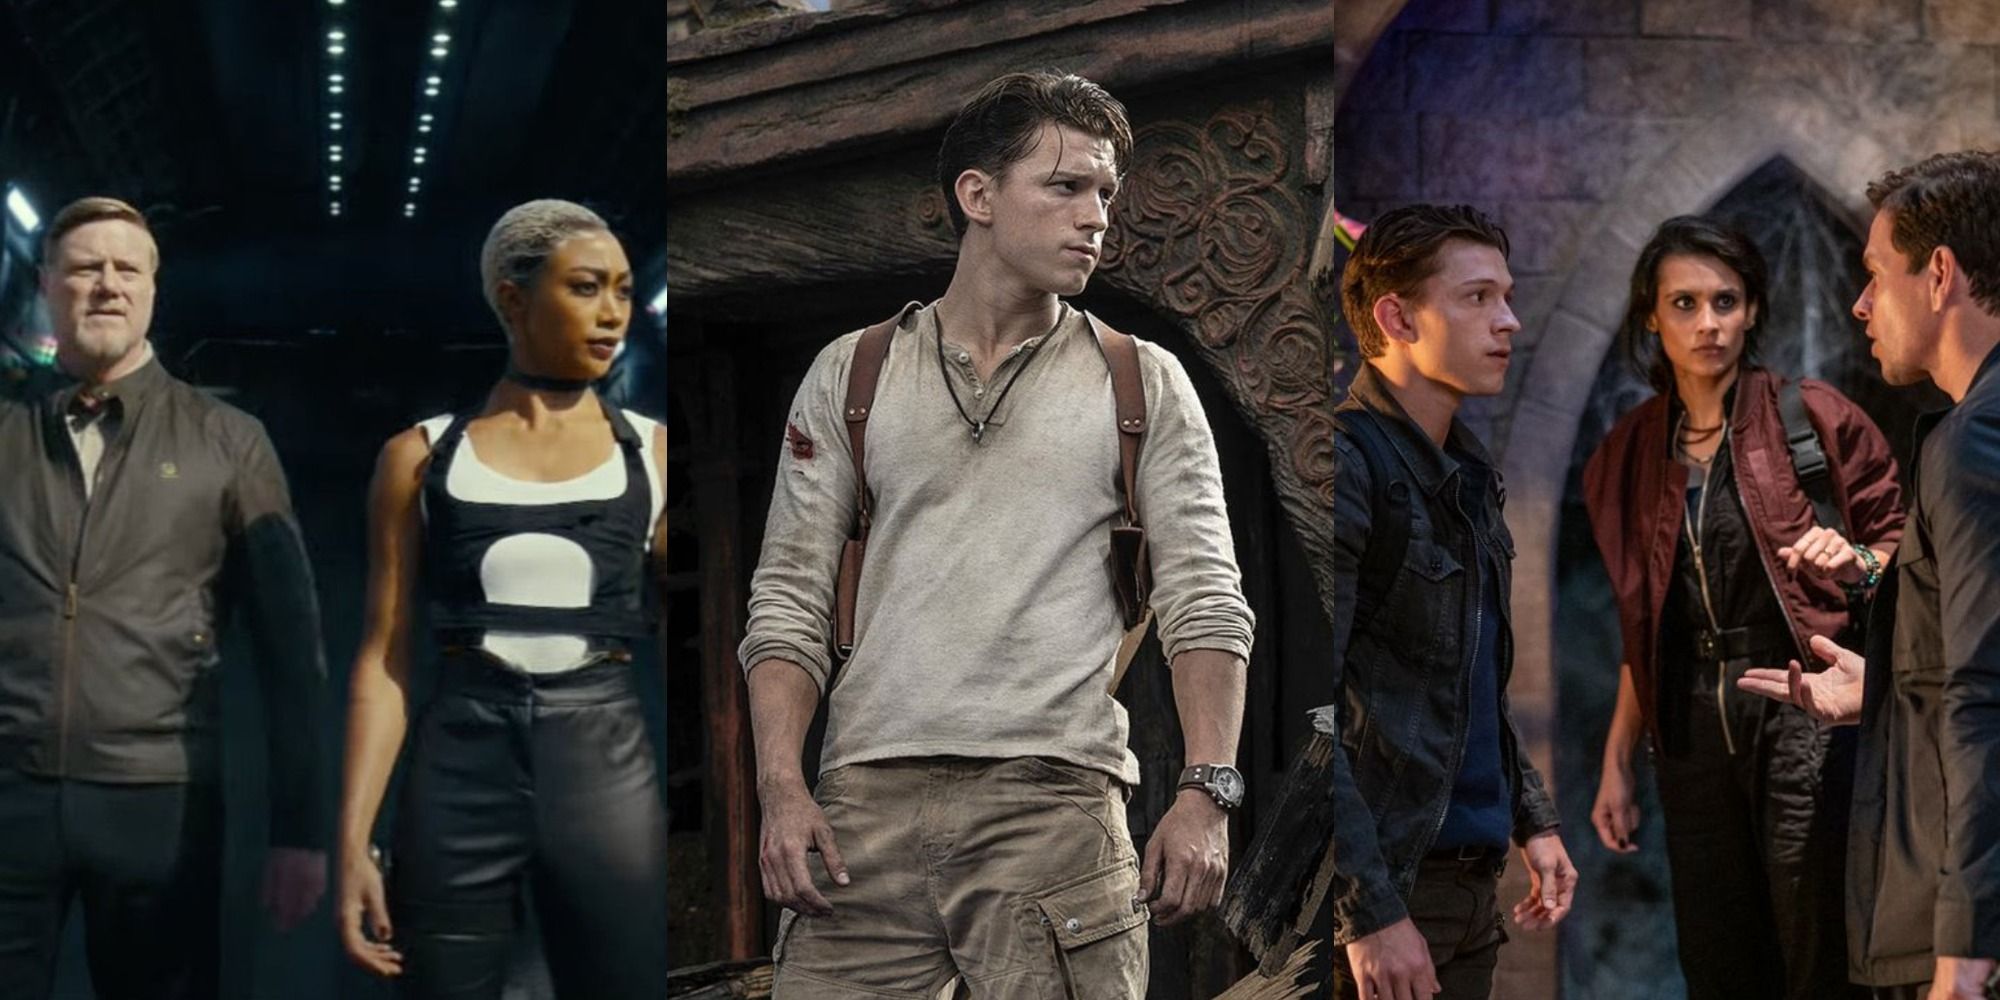 Uncharted: Every Main Character's Age, Height, And Birthday